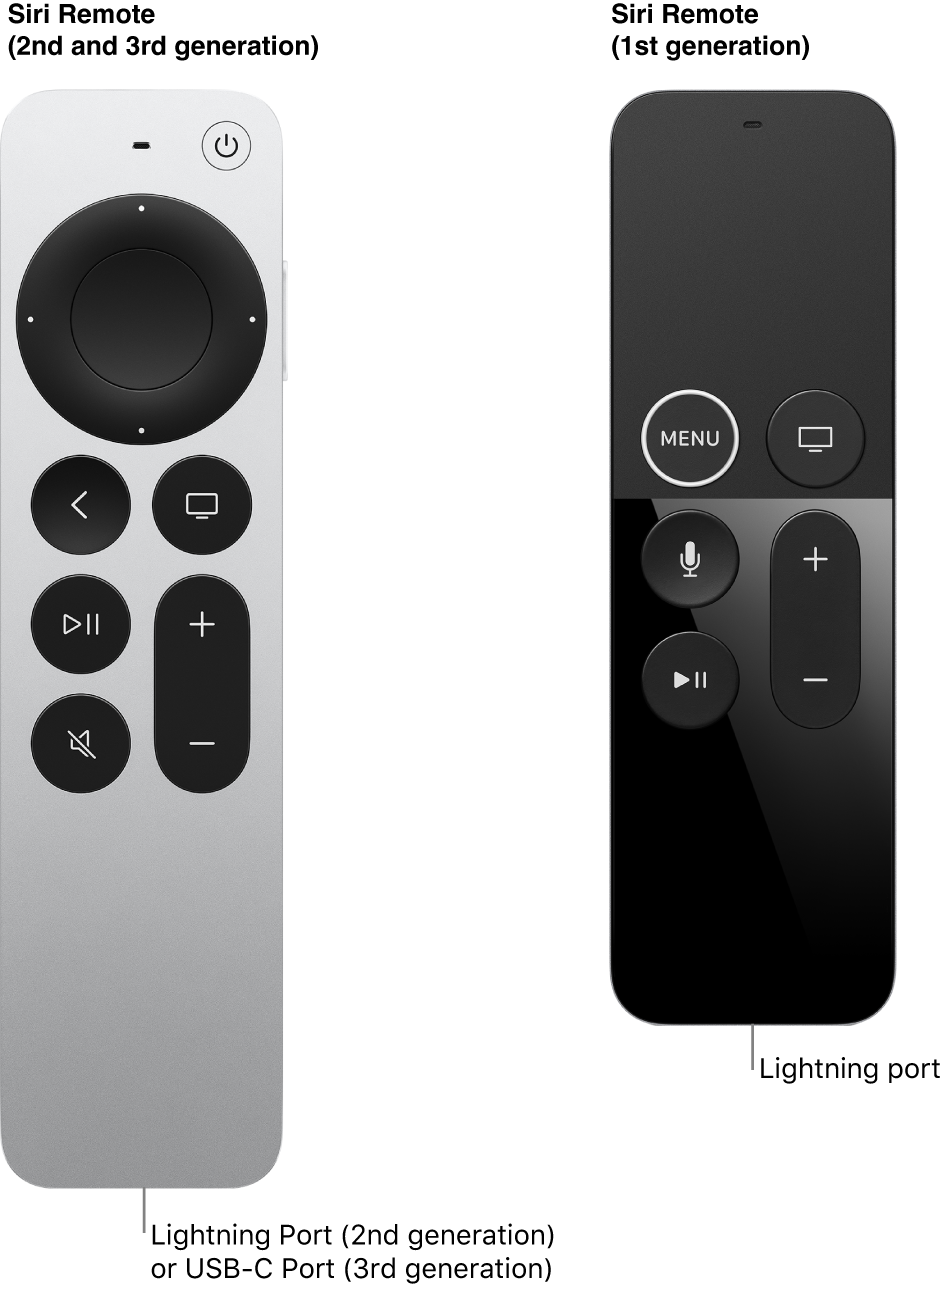 Image of Siri Remote (2nd and 3rd generation) and Siri Remote (1st generation) showing the connector port